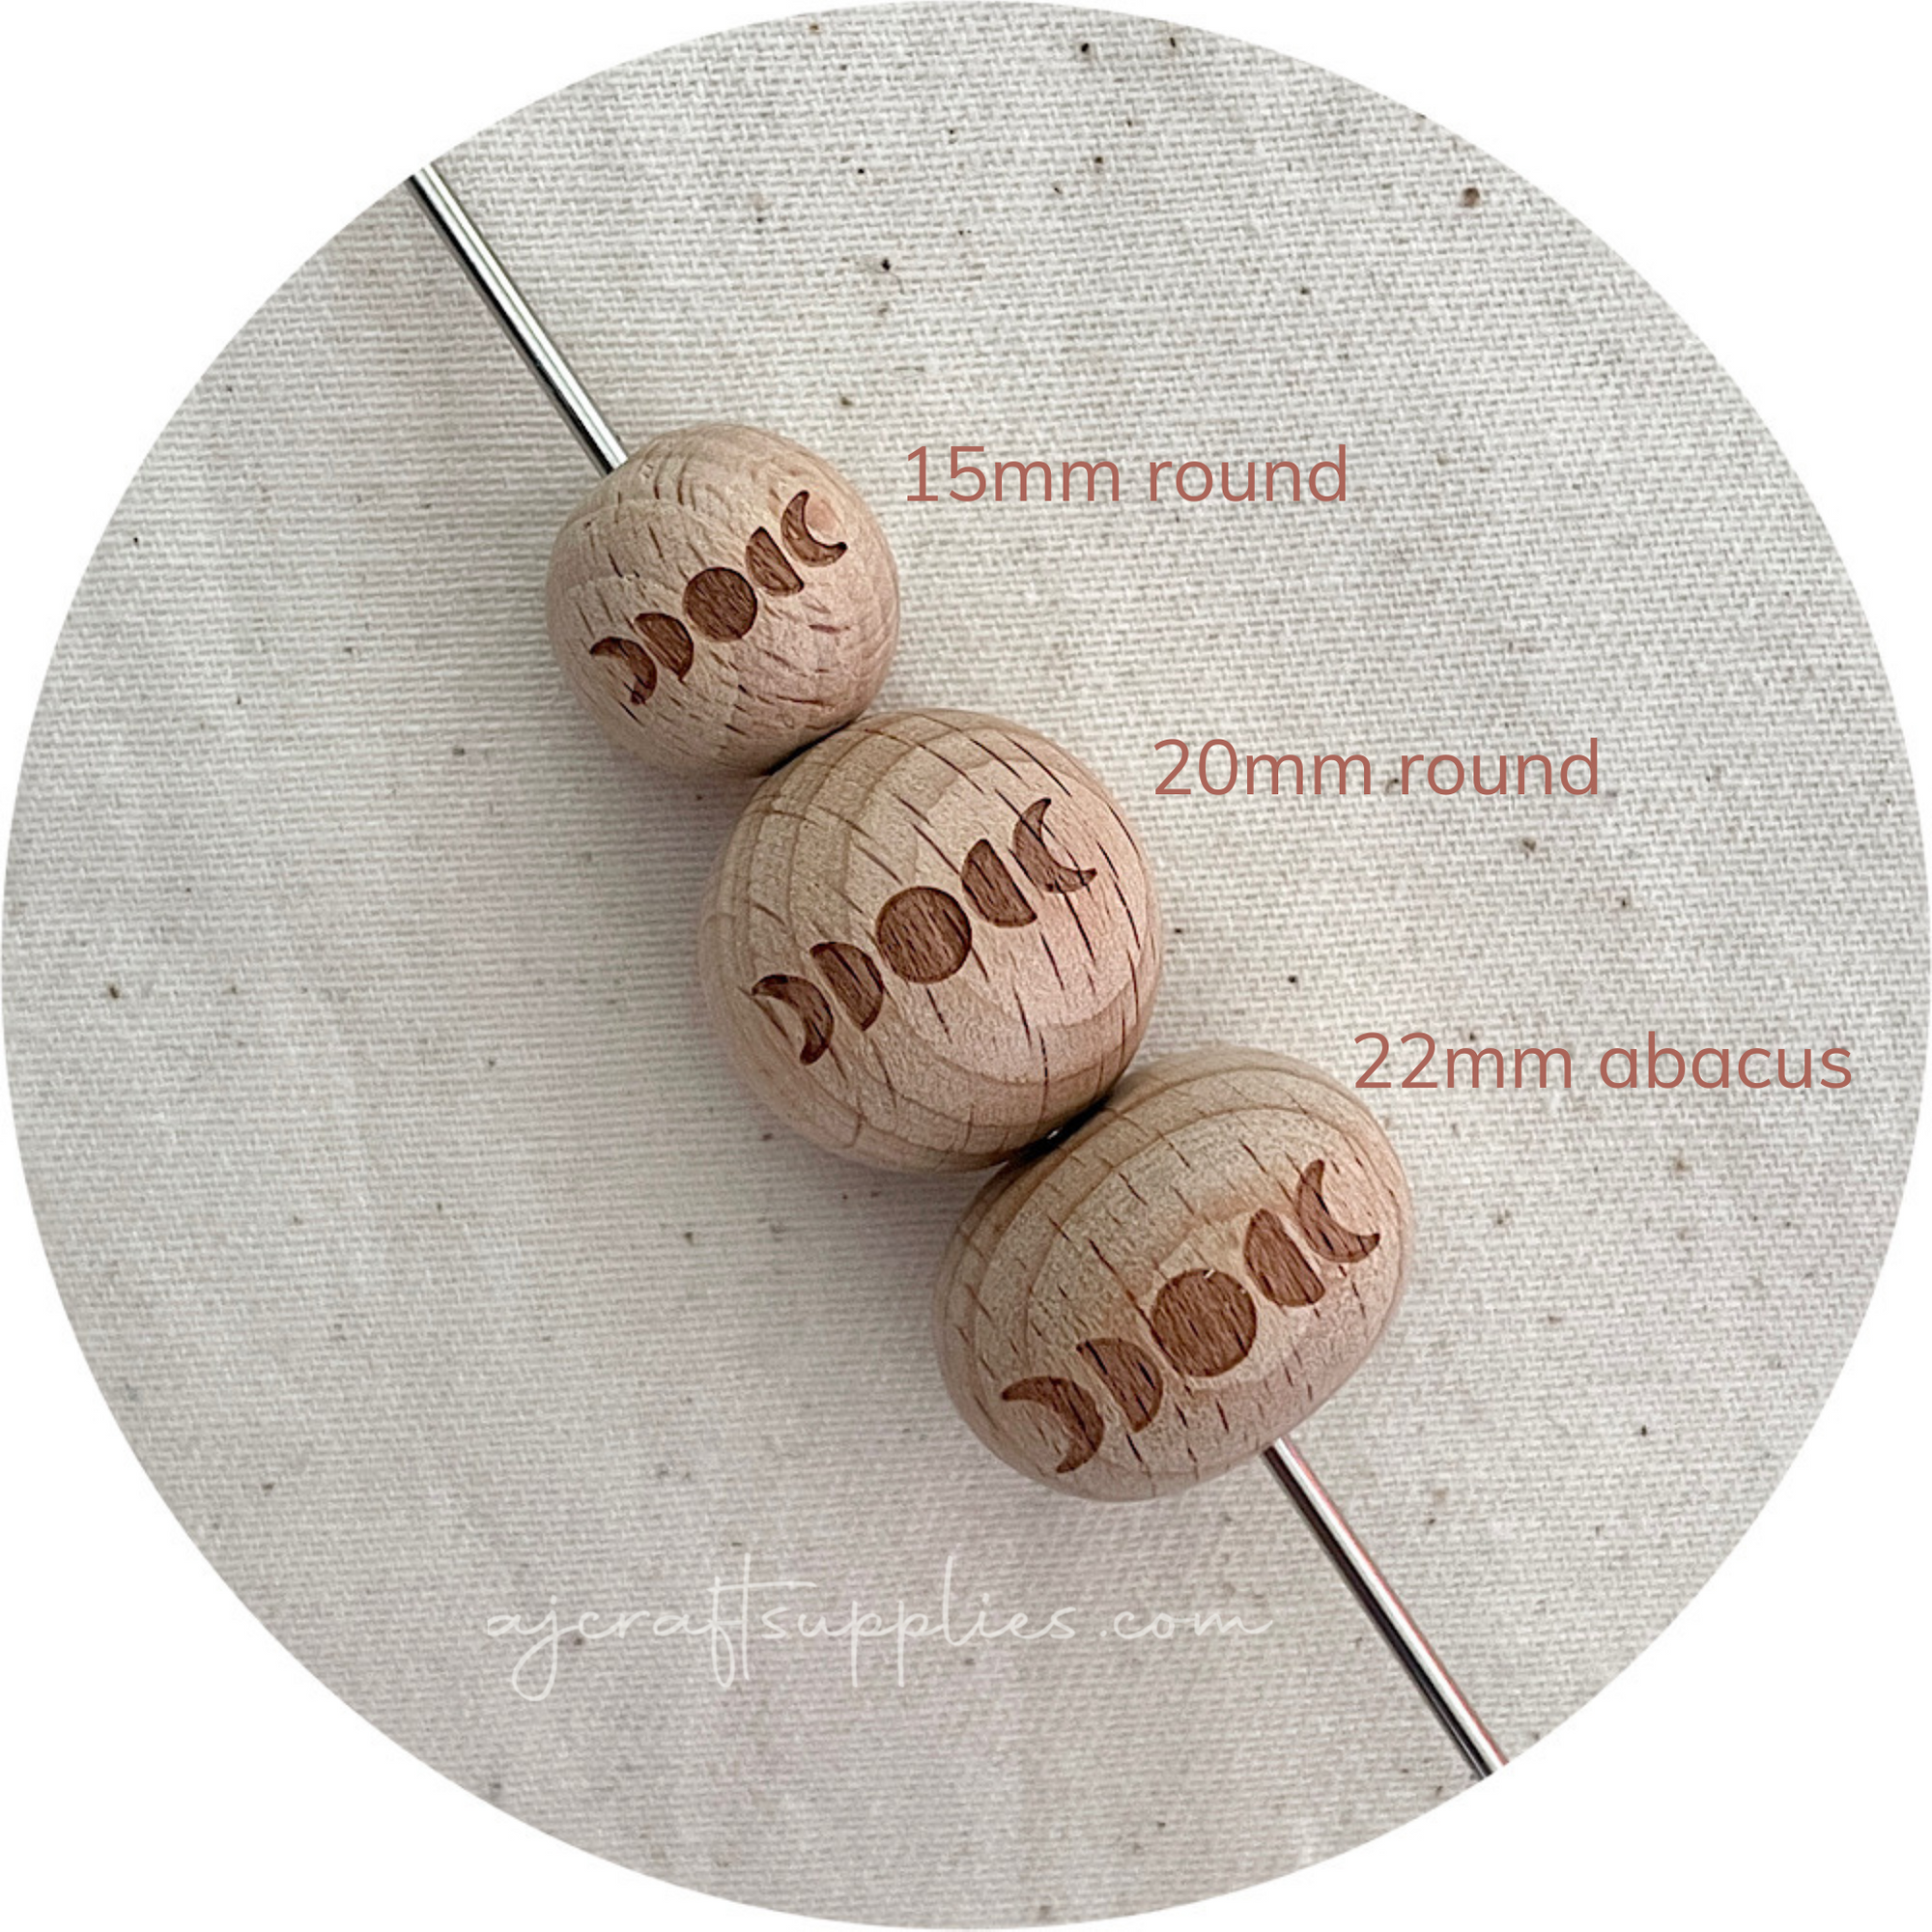 Beech Wood Engraved Beads (MOON PHASE) - CHOOSE A SIZE - 5 beads